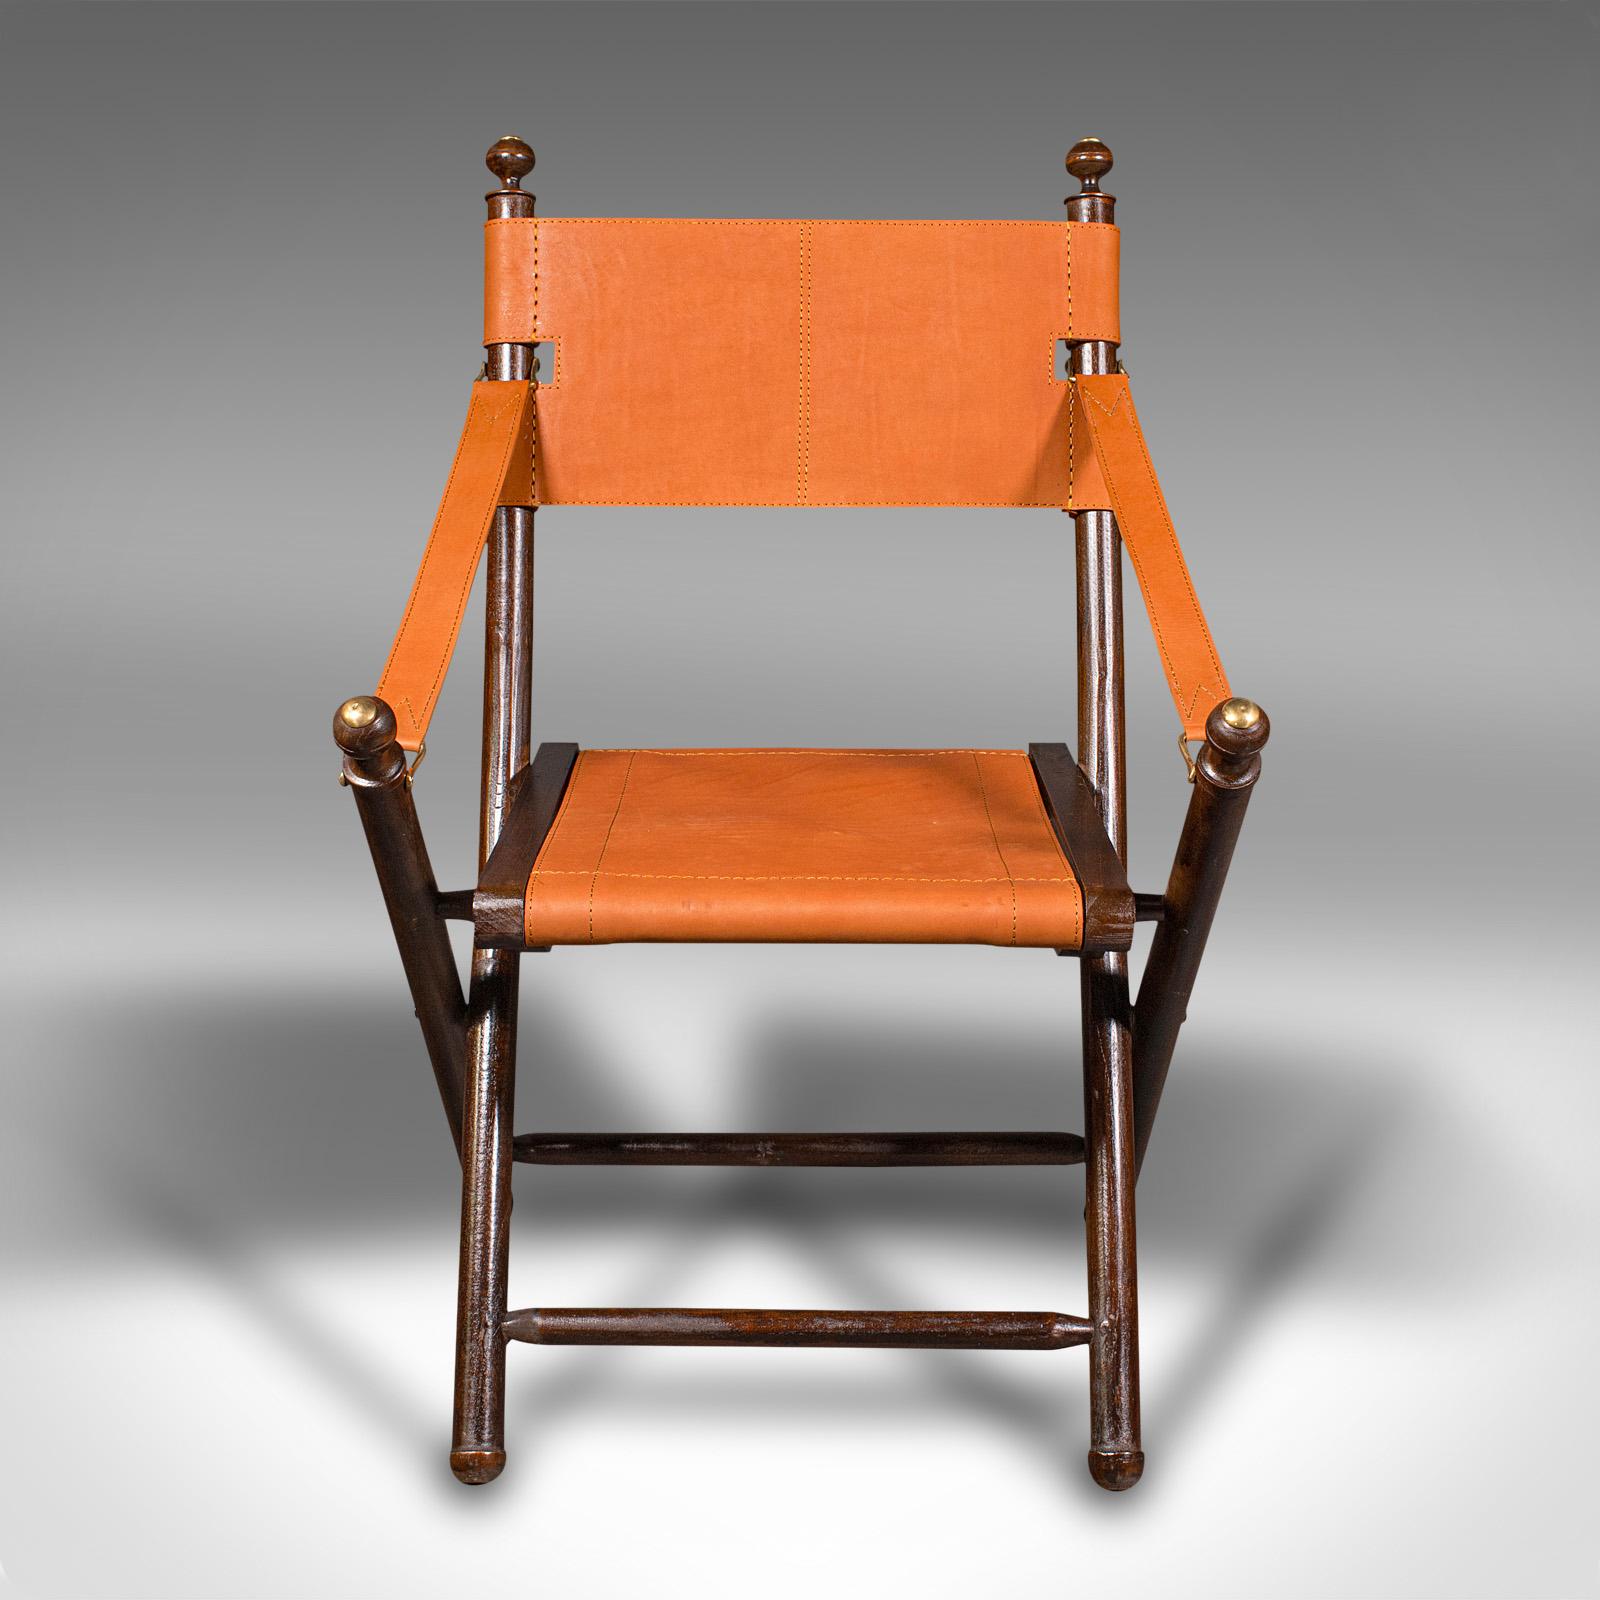 British Pair Of Contemporary Veranda Chairs, English, Leather, Orangery, Folding Seat For Sale